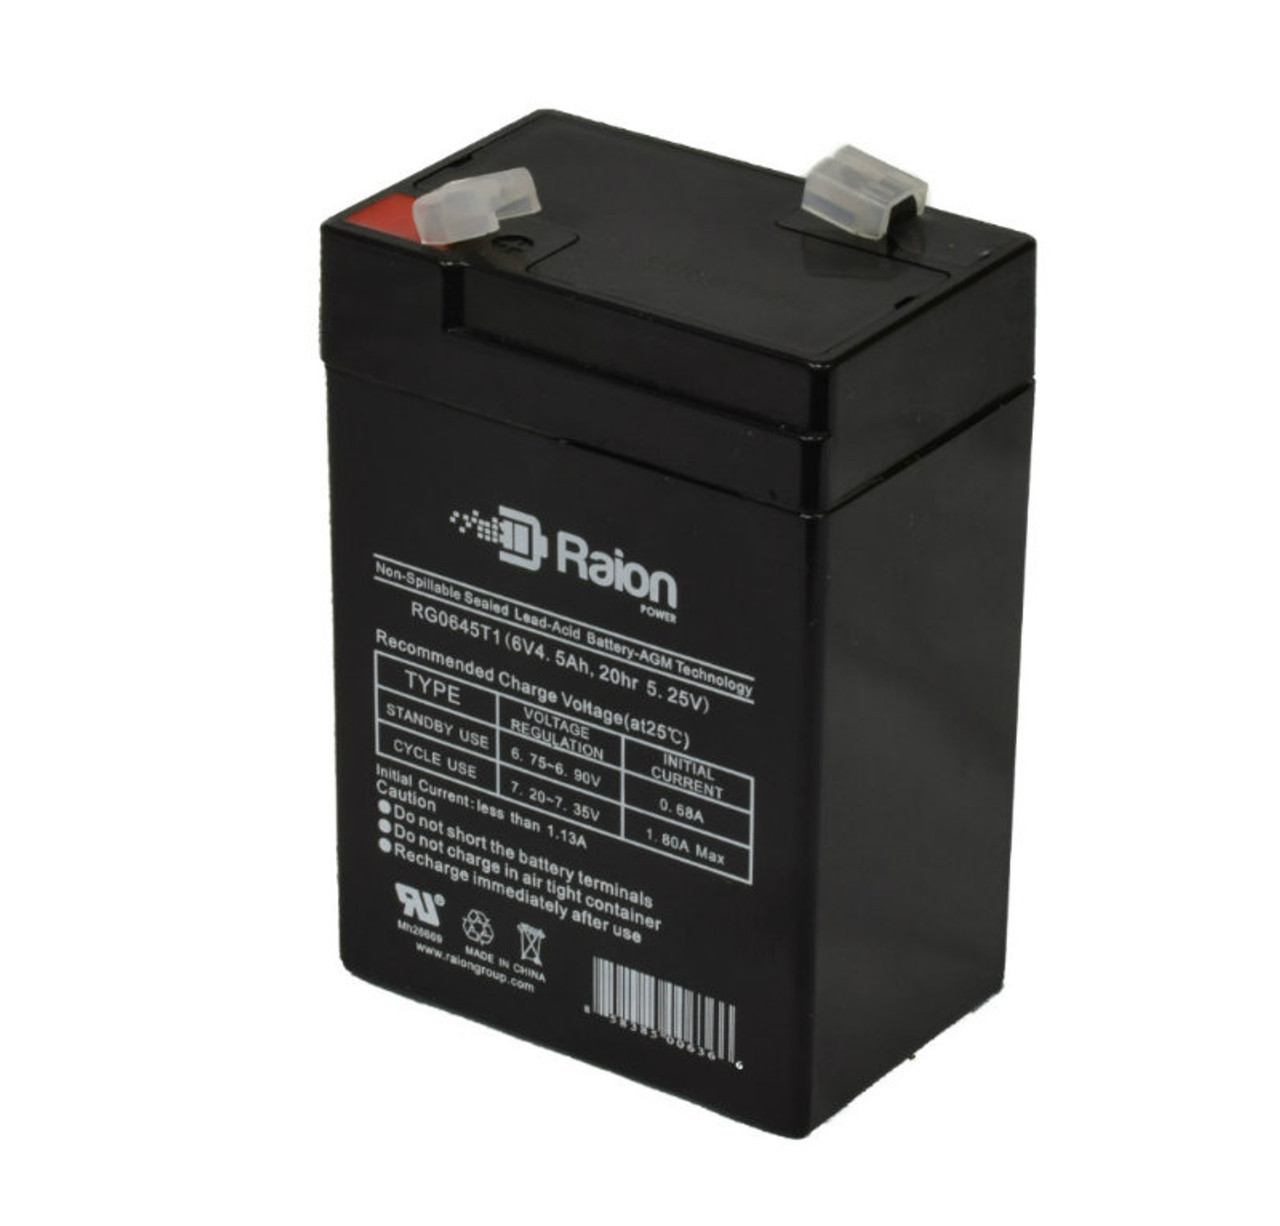 Raion Power RG0645T1 6V 4.5Ah Replacement Battery Cartridge for Sentry PM655